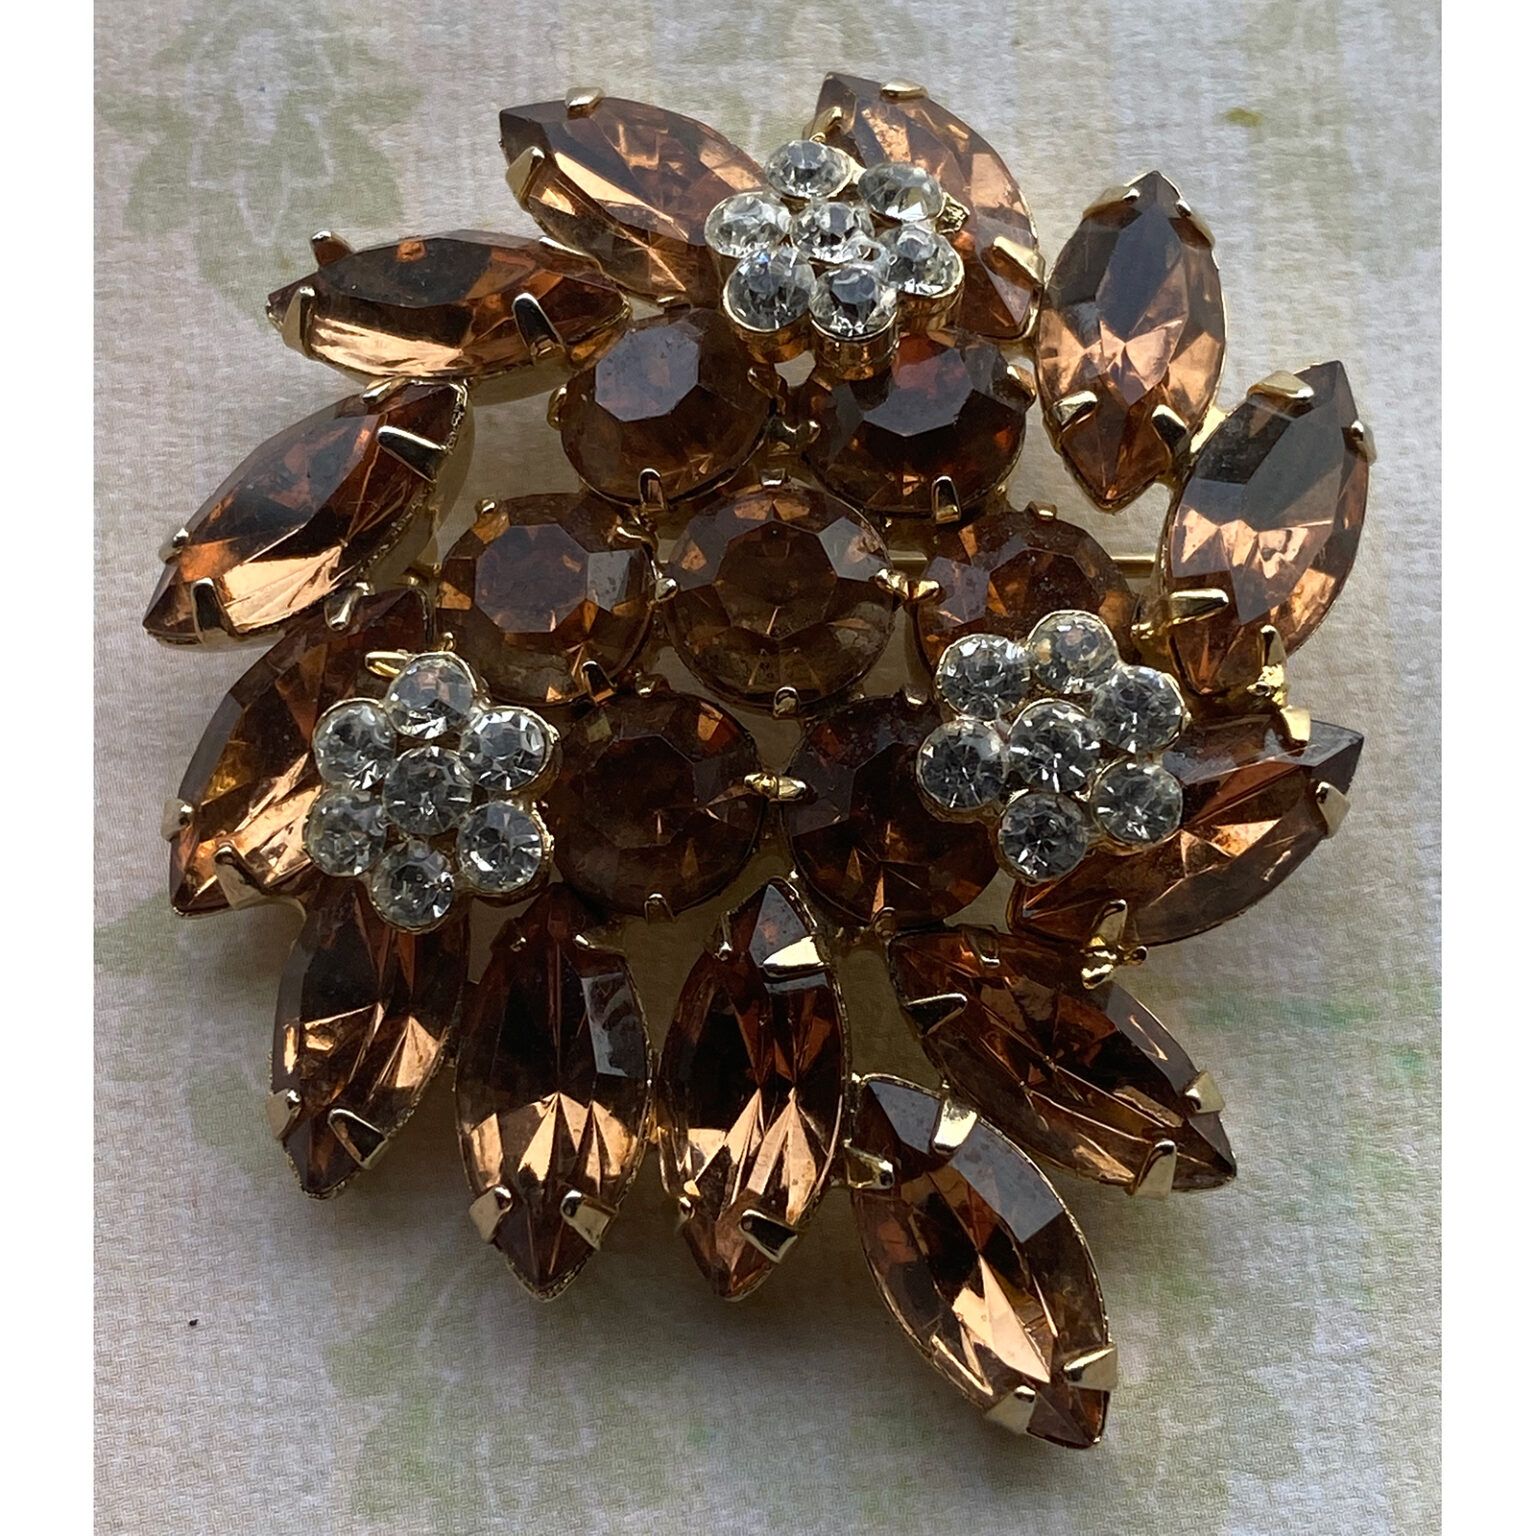 Vintage Weiss Brooch with Navettes and Chaton-Cut Florets